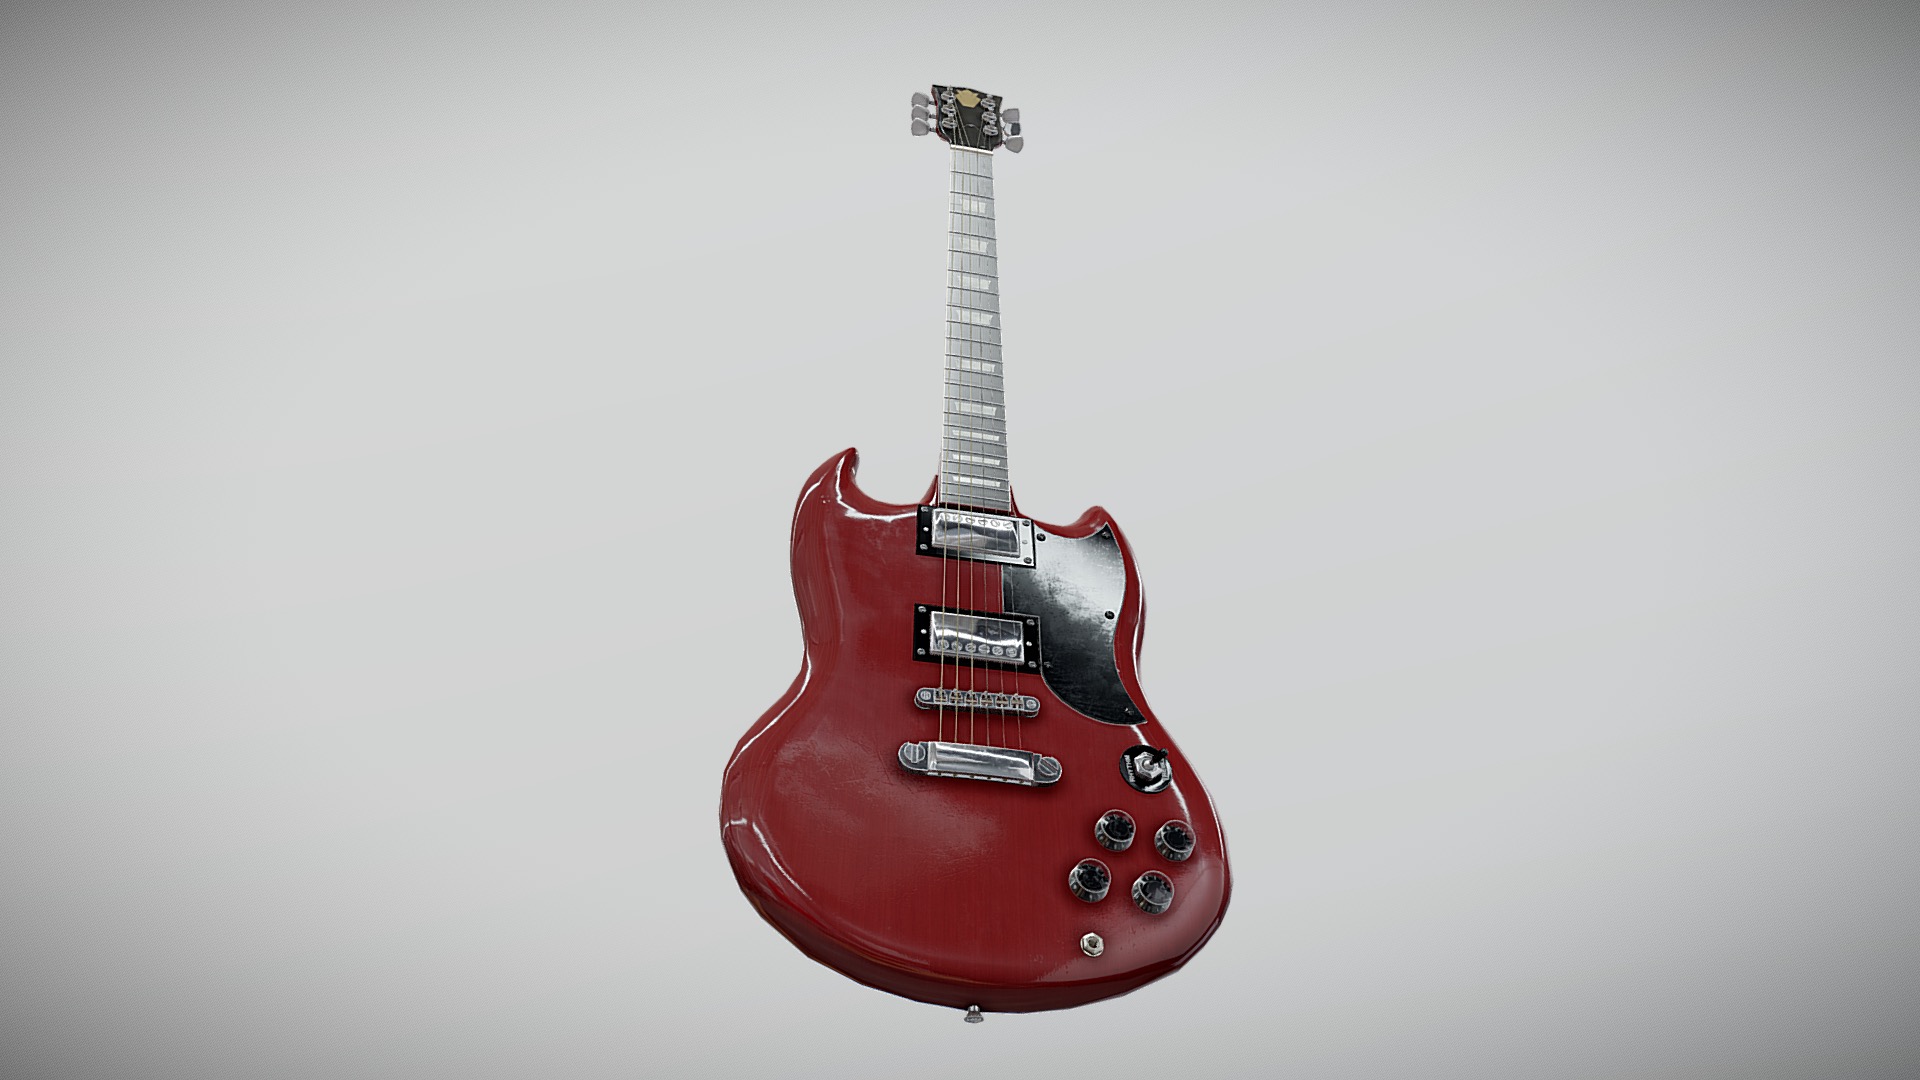 3D model SG Electric Guitar - This is a 3D model of the SG Electric Guitar. The 3D model is about a red electric guitar.